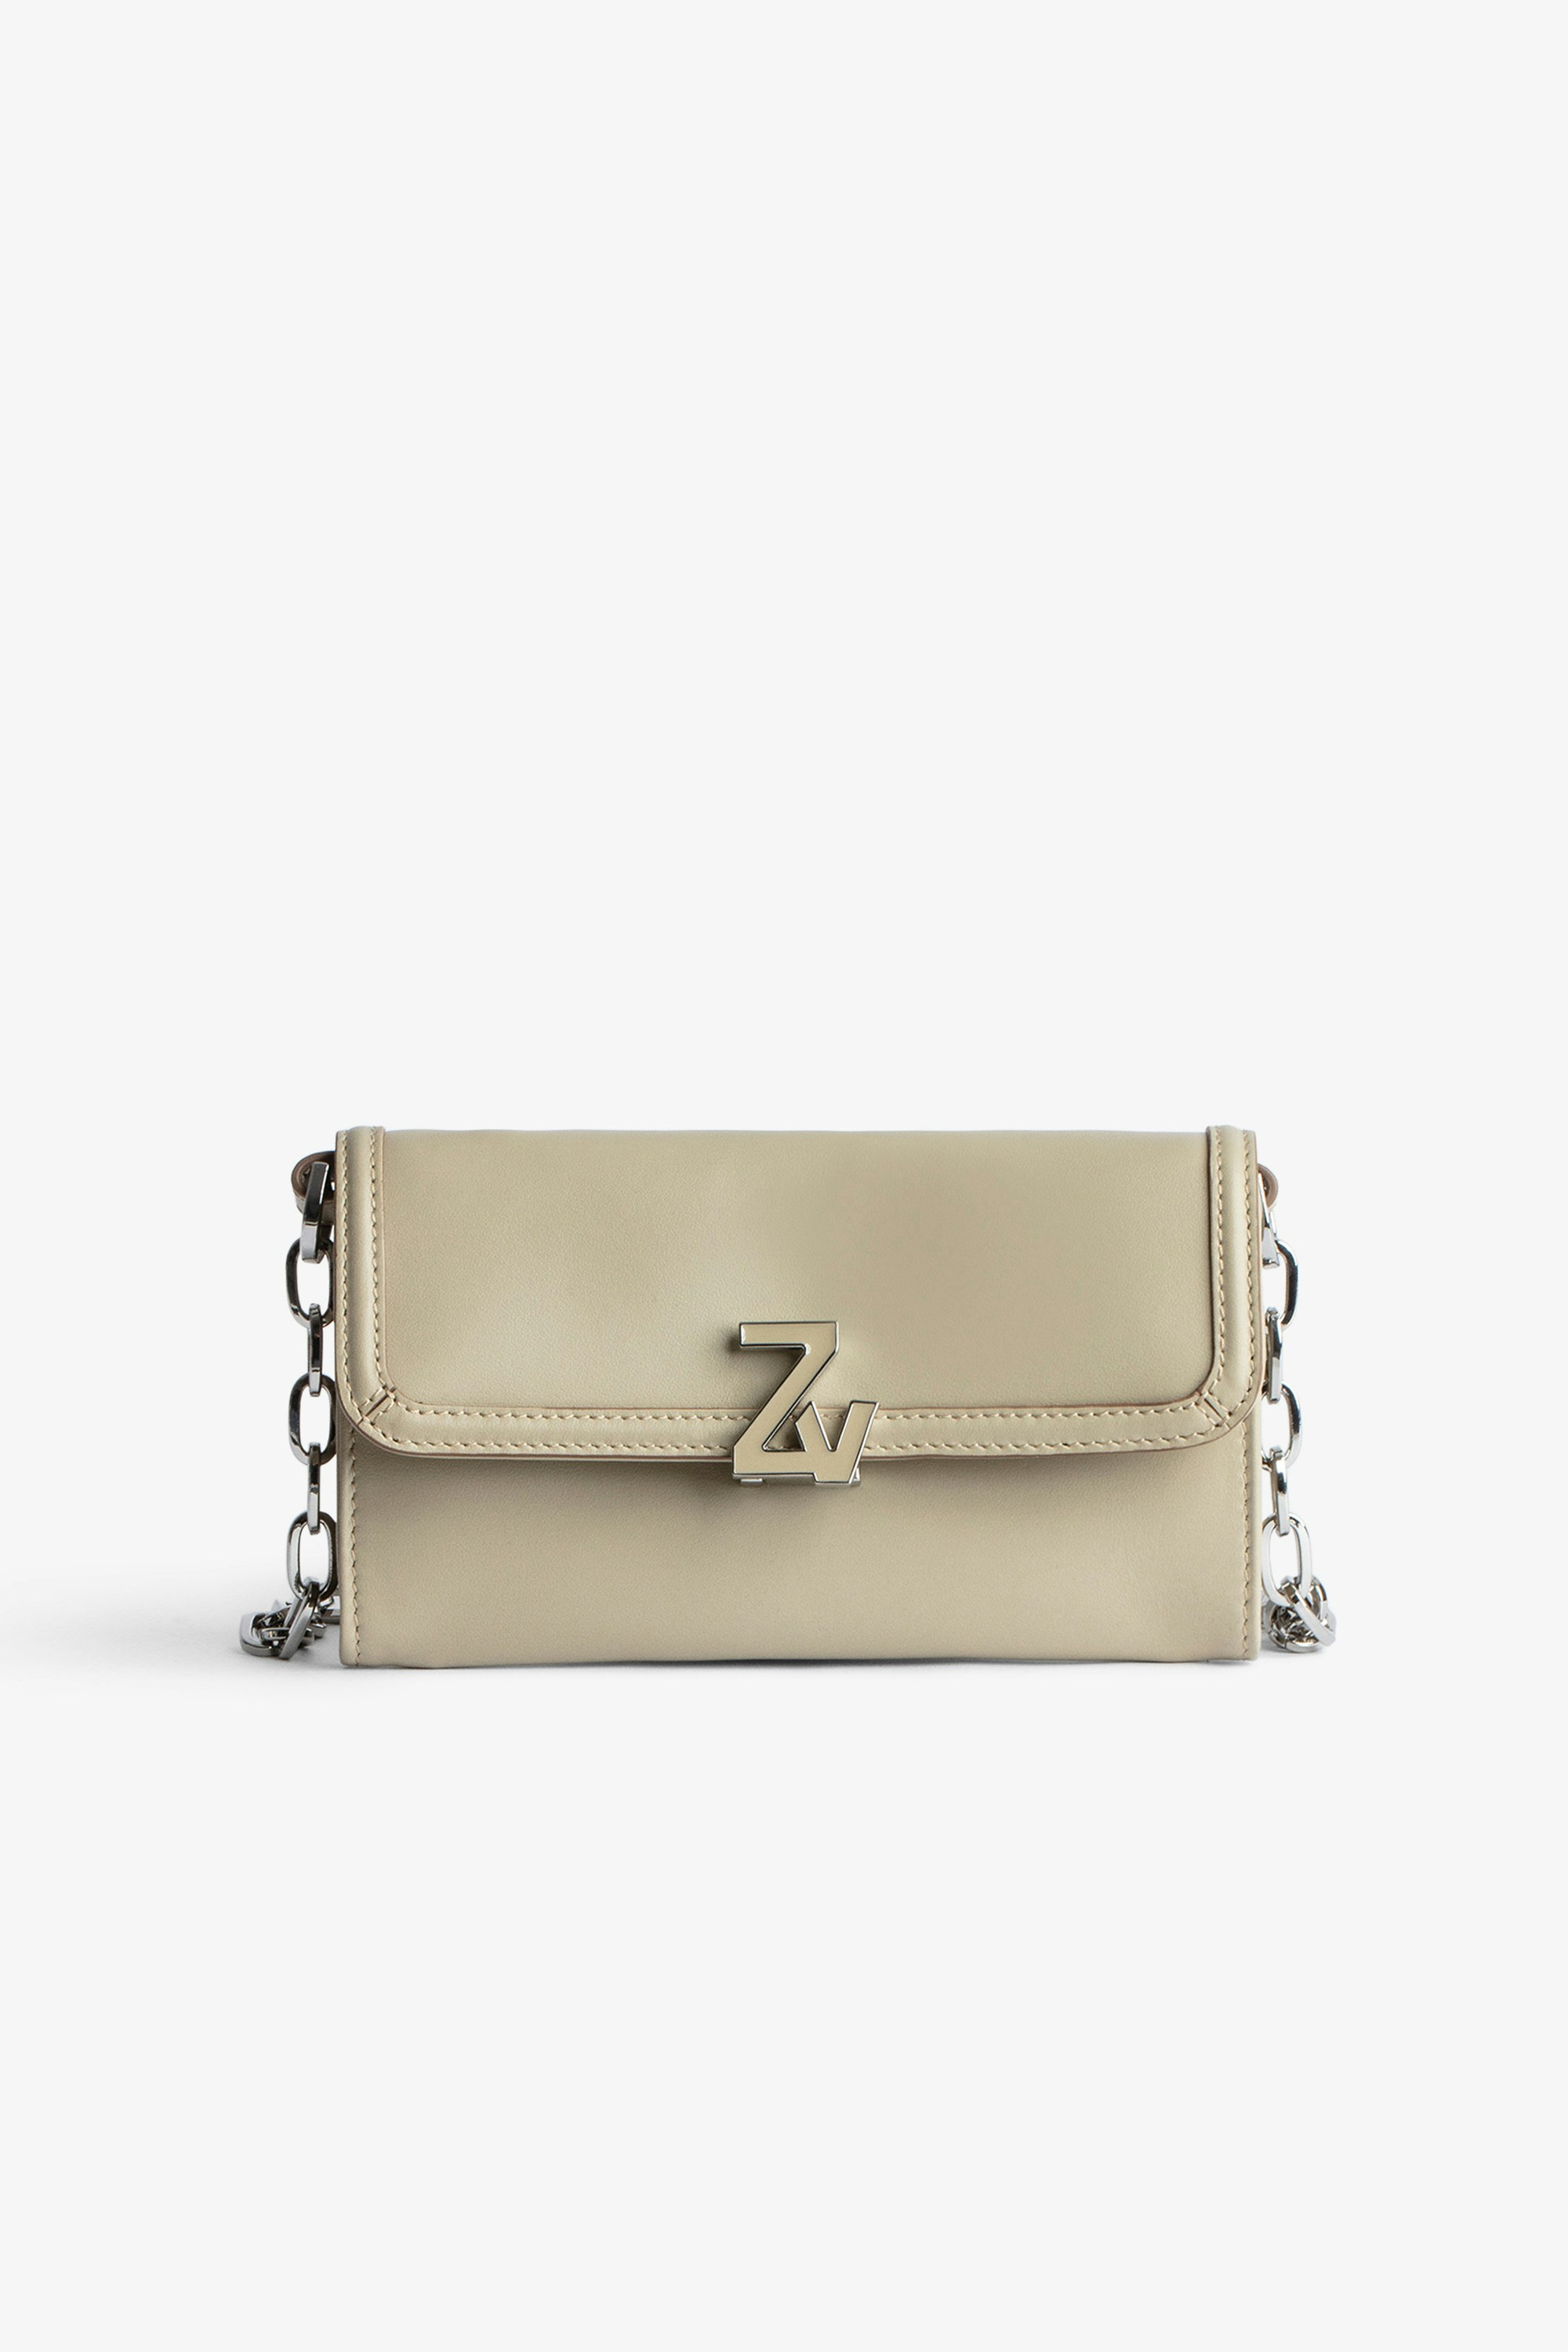 ZV Initiale Le Long Unchained 財布 Women’s beige smooth leather wallet with yellow ZV